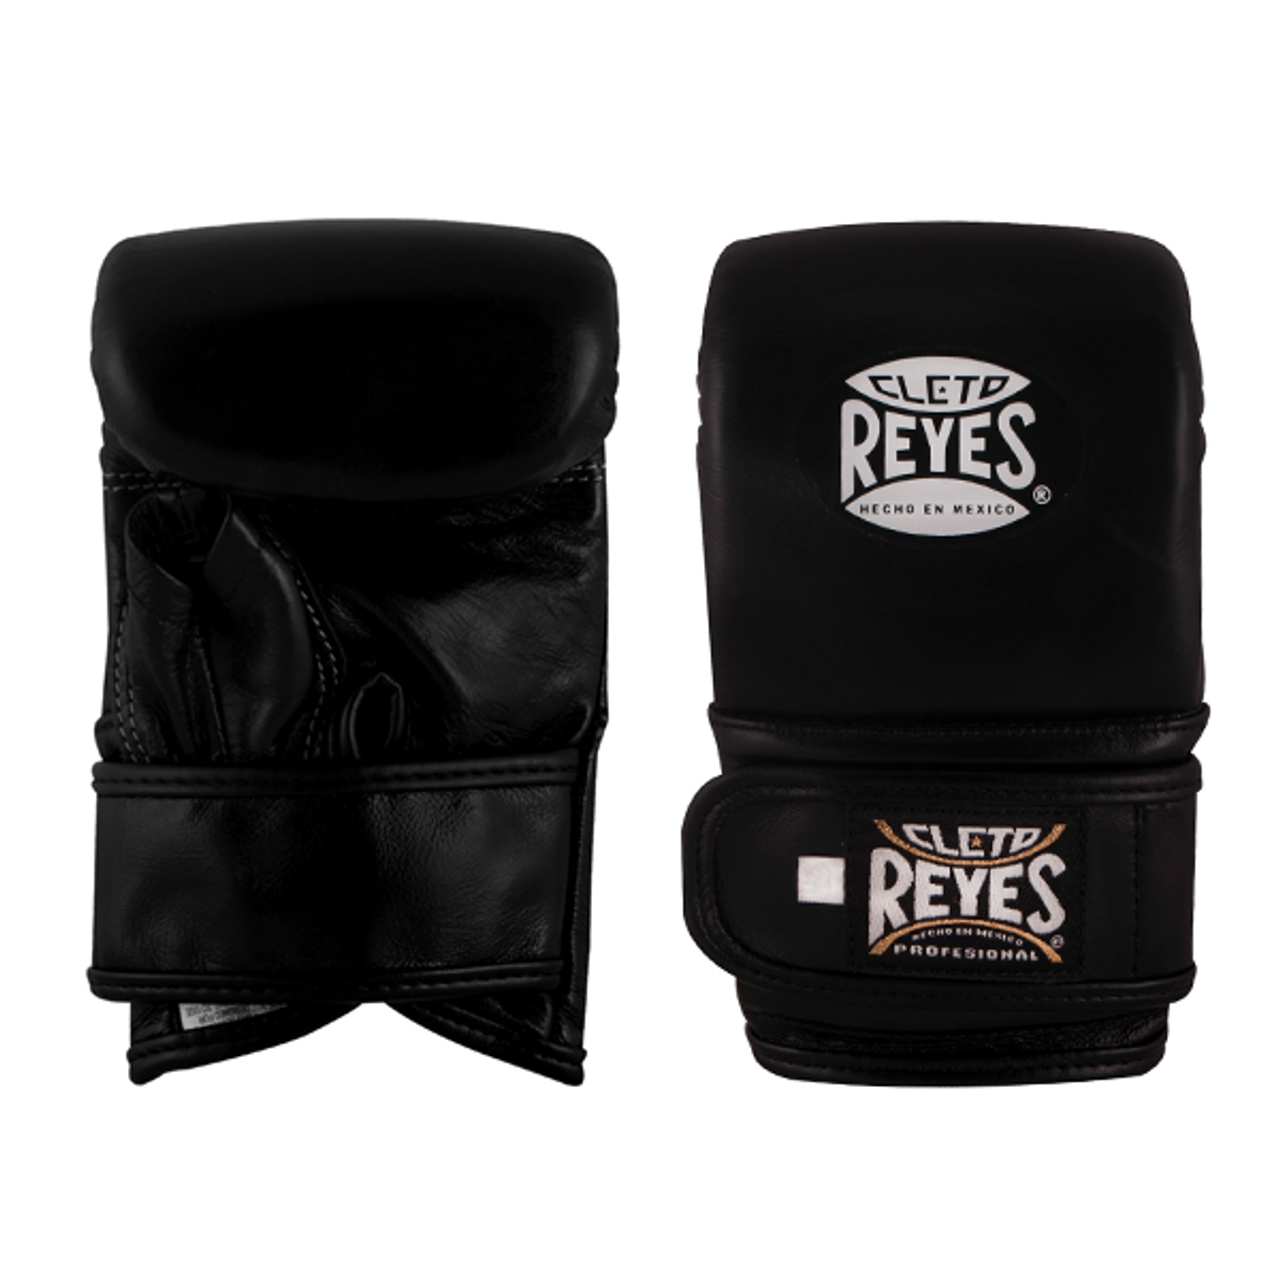 Black Cleto Reyes Leather Boxing Bag Gloves with Hook and Loop Closure 